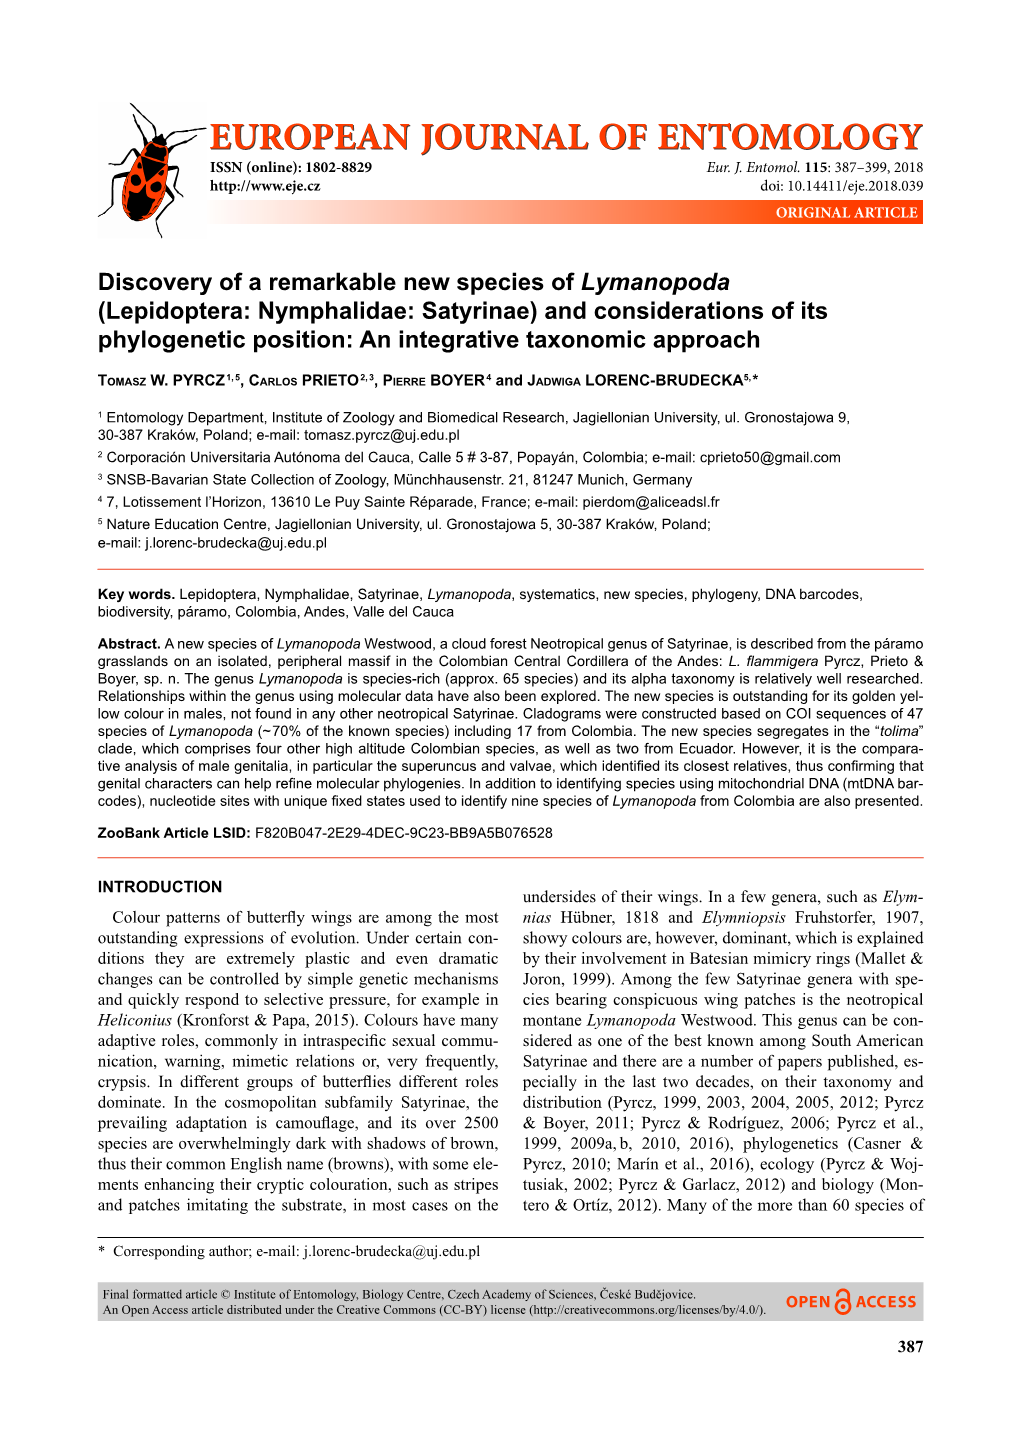 Lepidoptera: Nymphalidae: Satyrinae) and Considerations of Its Phylogenetic Position: an Integrative Taxonomic Approach